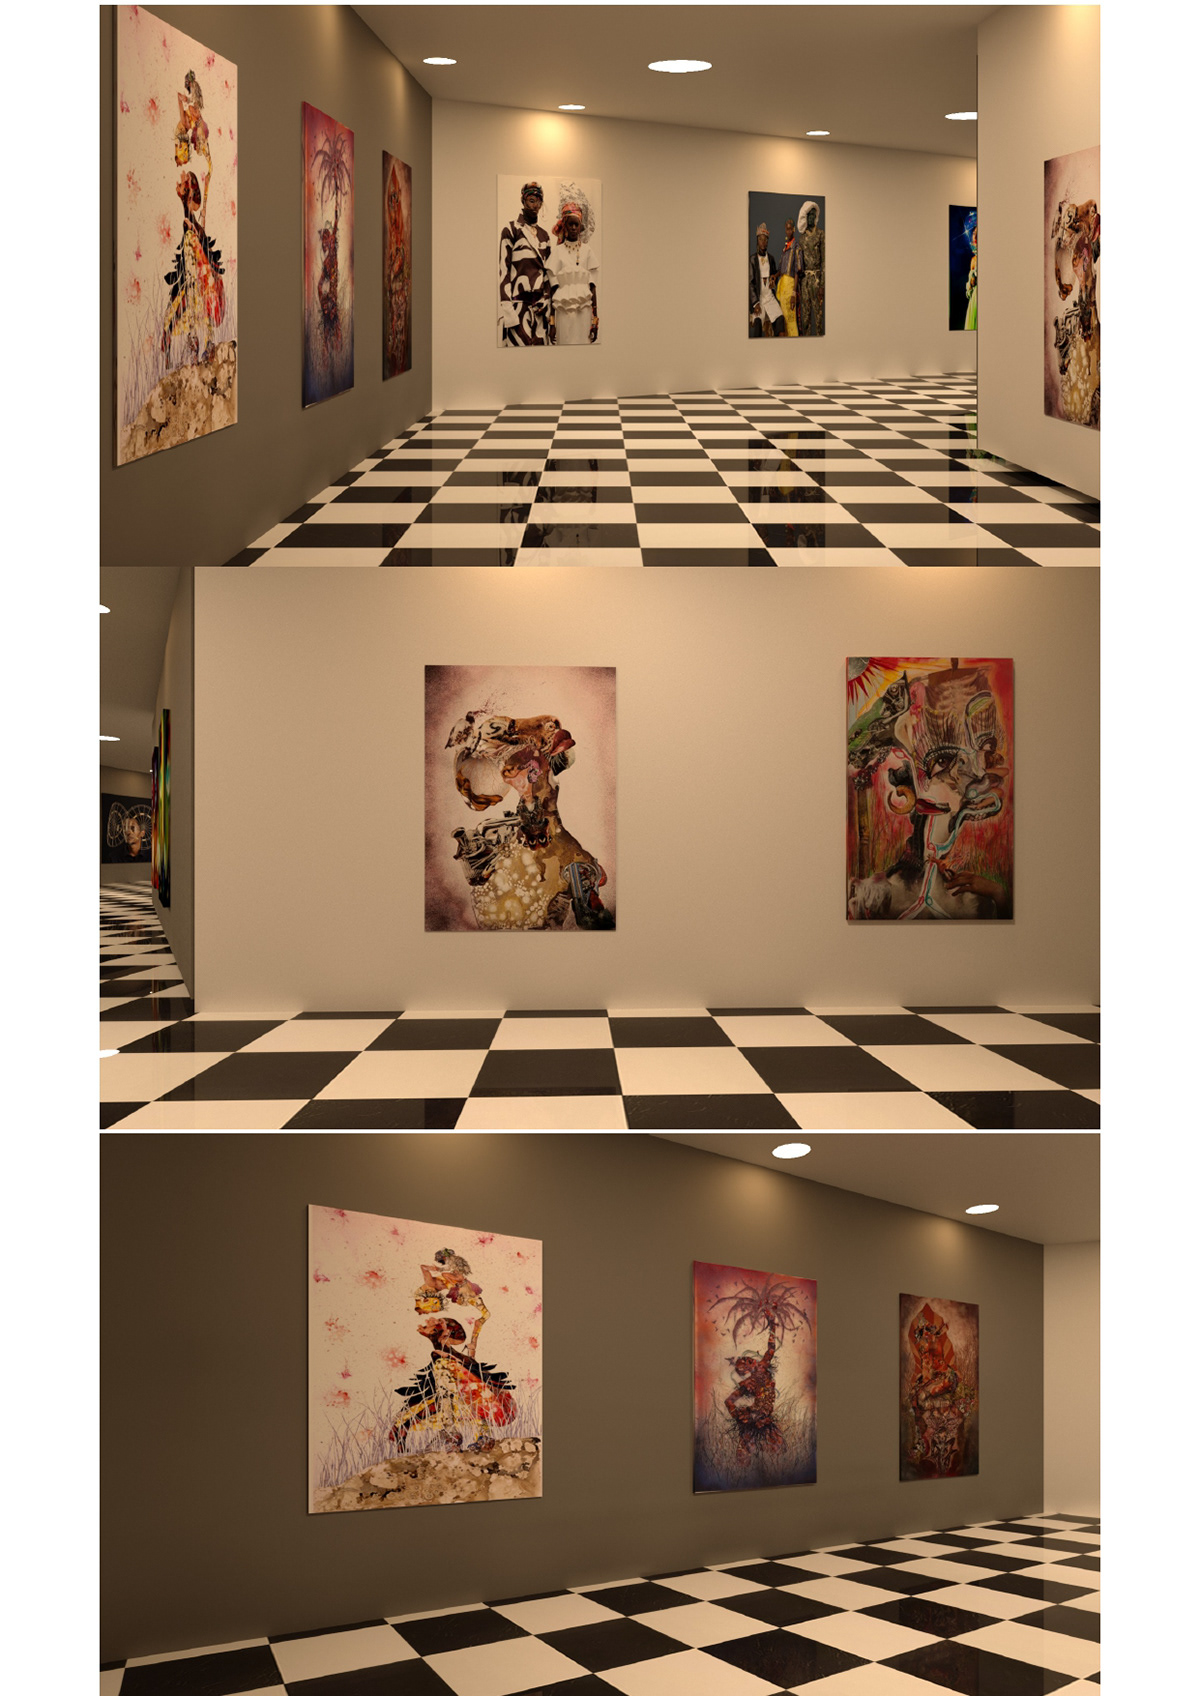 Art Gallery  afrofuturism autodesk 3ds max back to the future concept Digital Art  mixed media museum